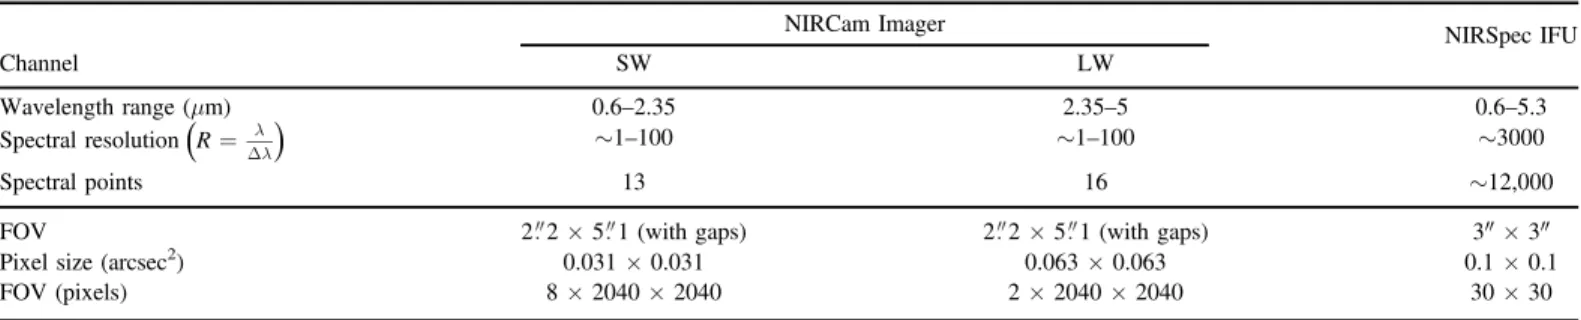 Figure 5. NIRCam Imager (top row) and NIRSpec IFU (bottom row) PSFs calculated with webbpsf (Perrin et al